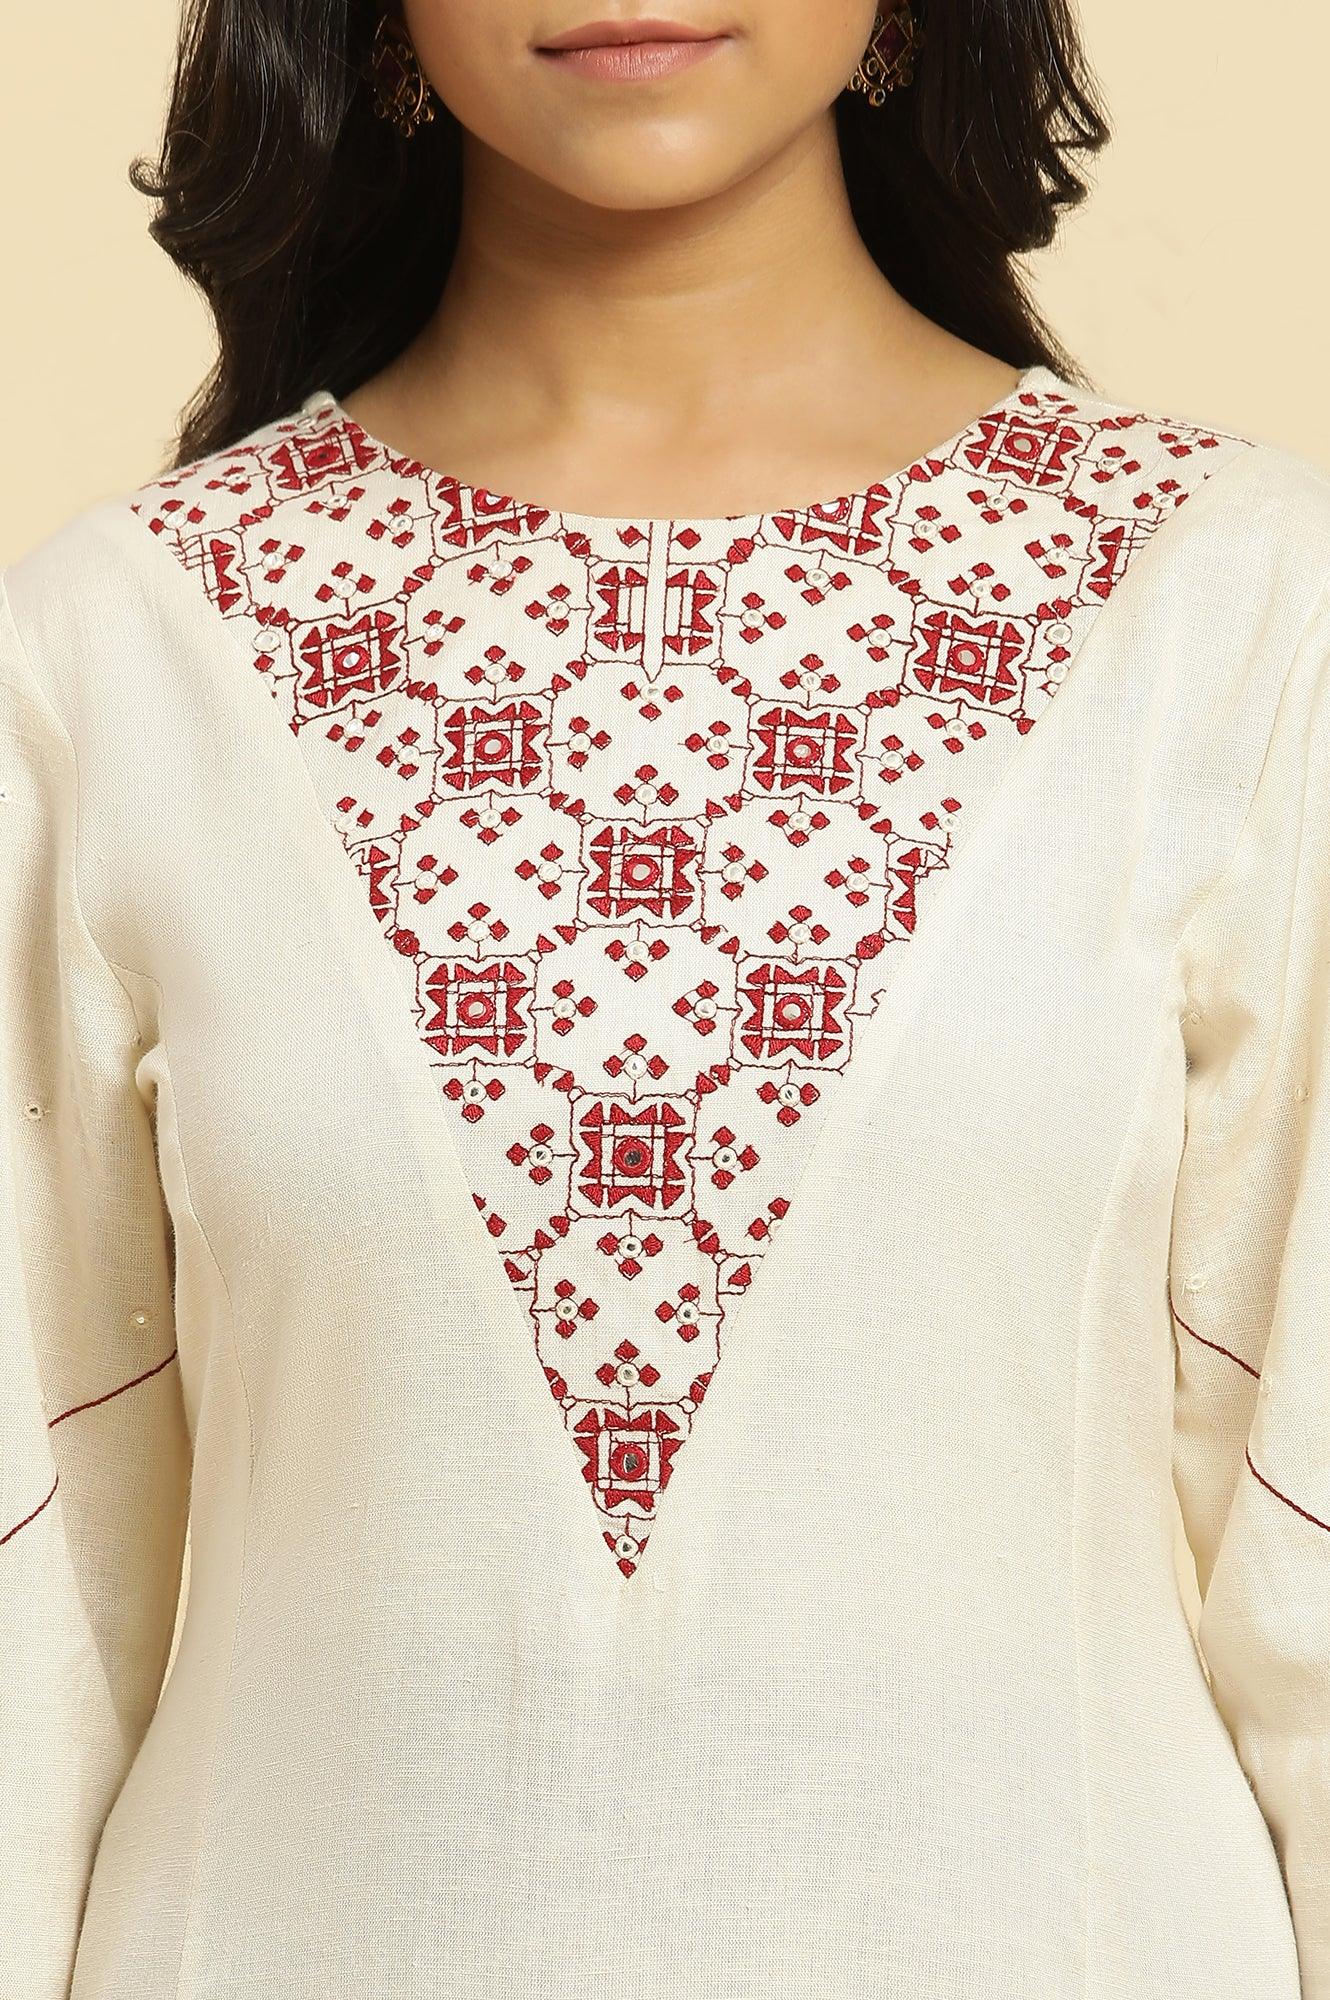 White Flared Kurta With Mirror Work And Embroidery - wforwoman